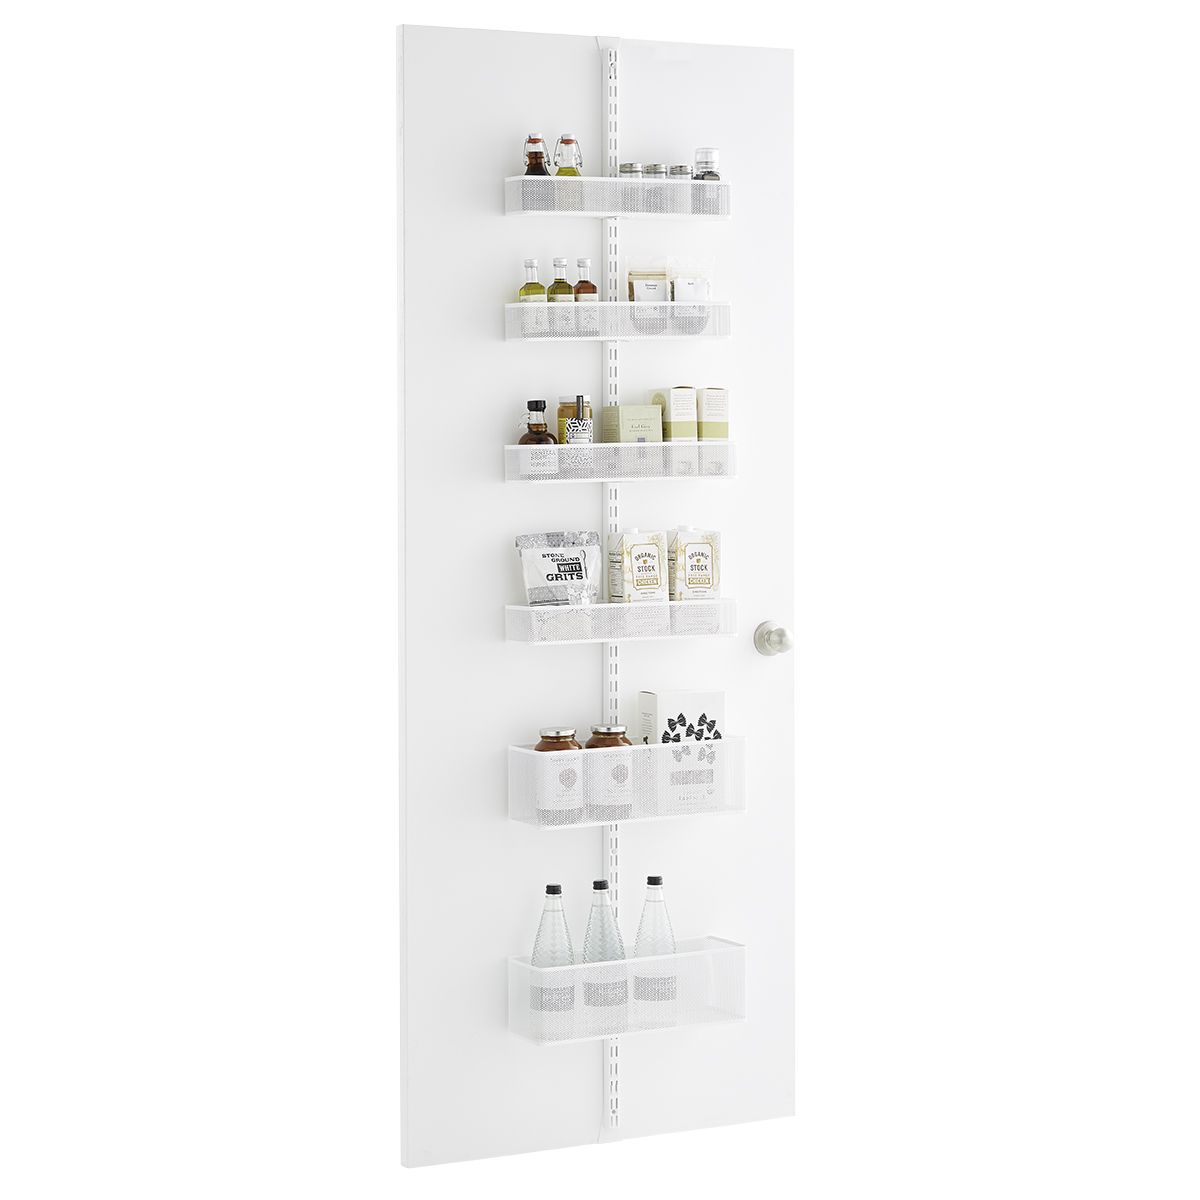 Mesh Door & Wall Rack Solution | The Container Store